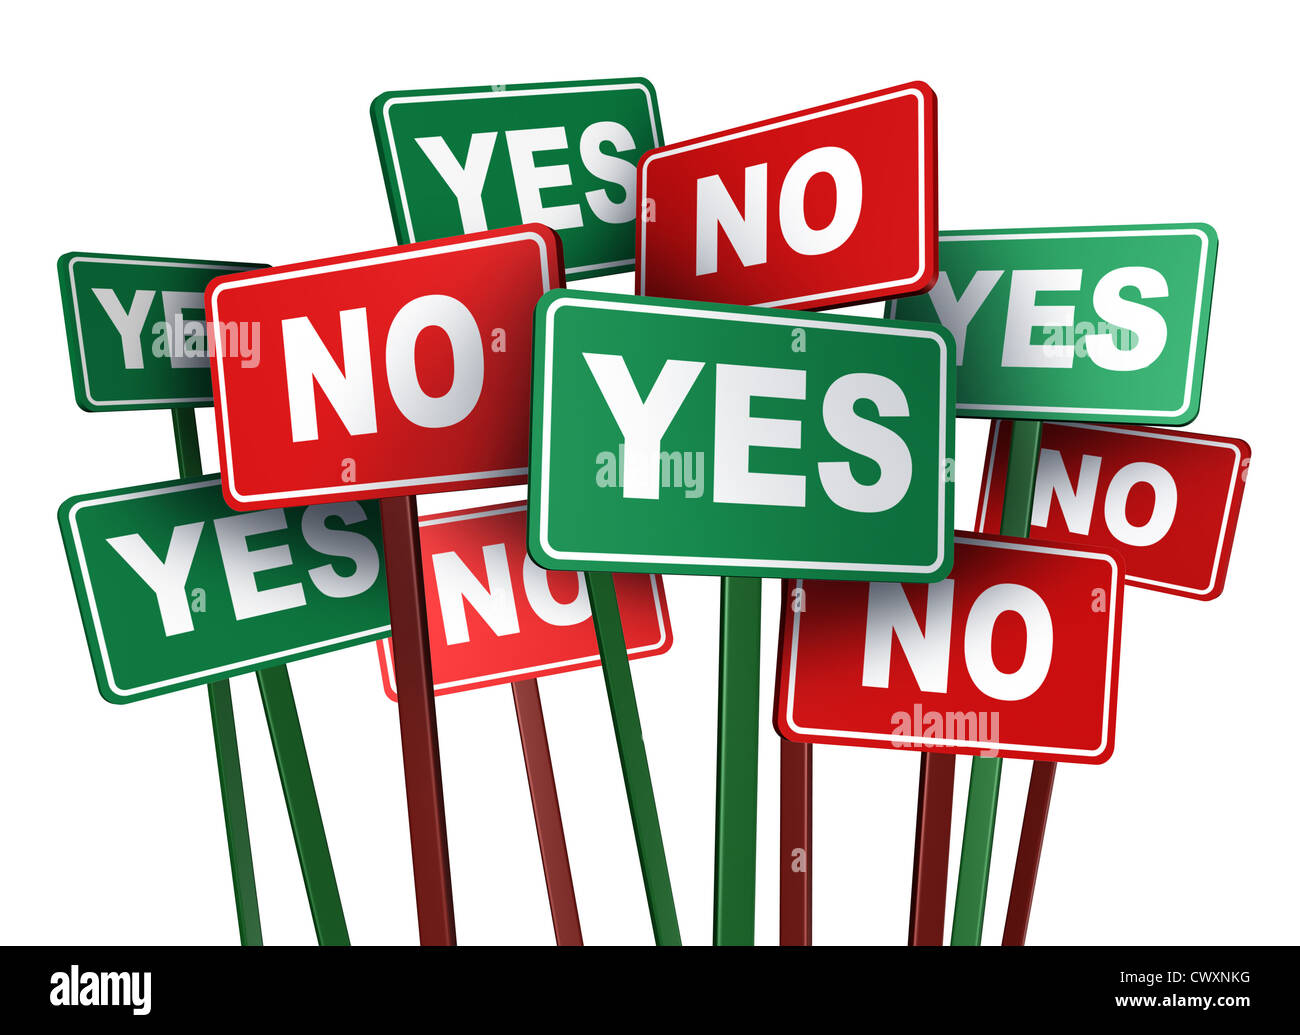 Voting yes or no with opposing and conflicting green and red campaign signs representing politics and important political issues that divide social opinion resulting in mass protest and demonstrations. Stock Photo